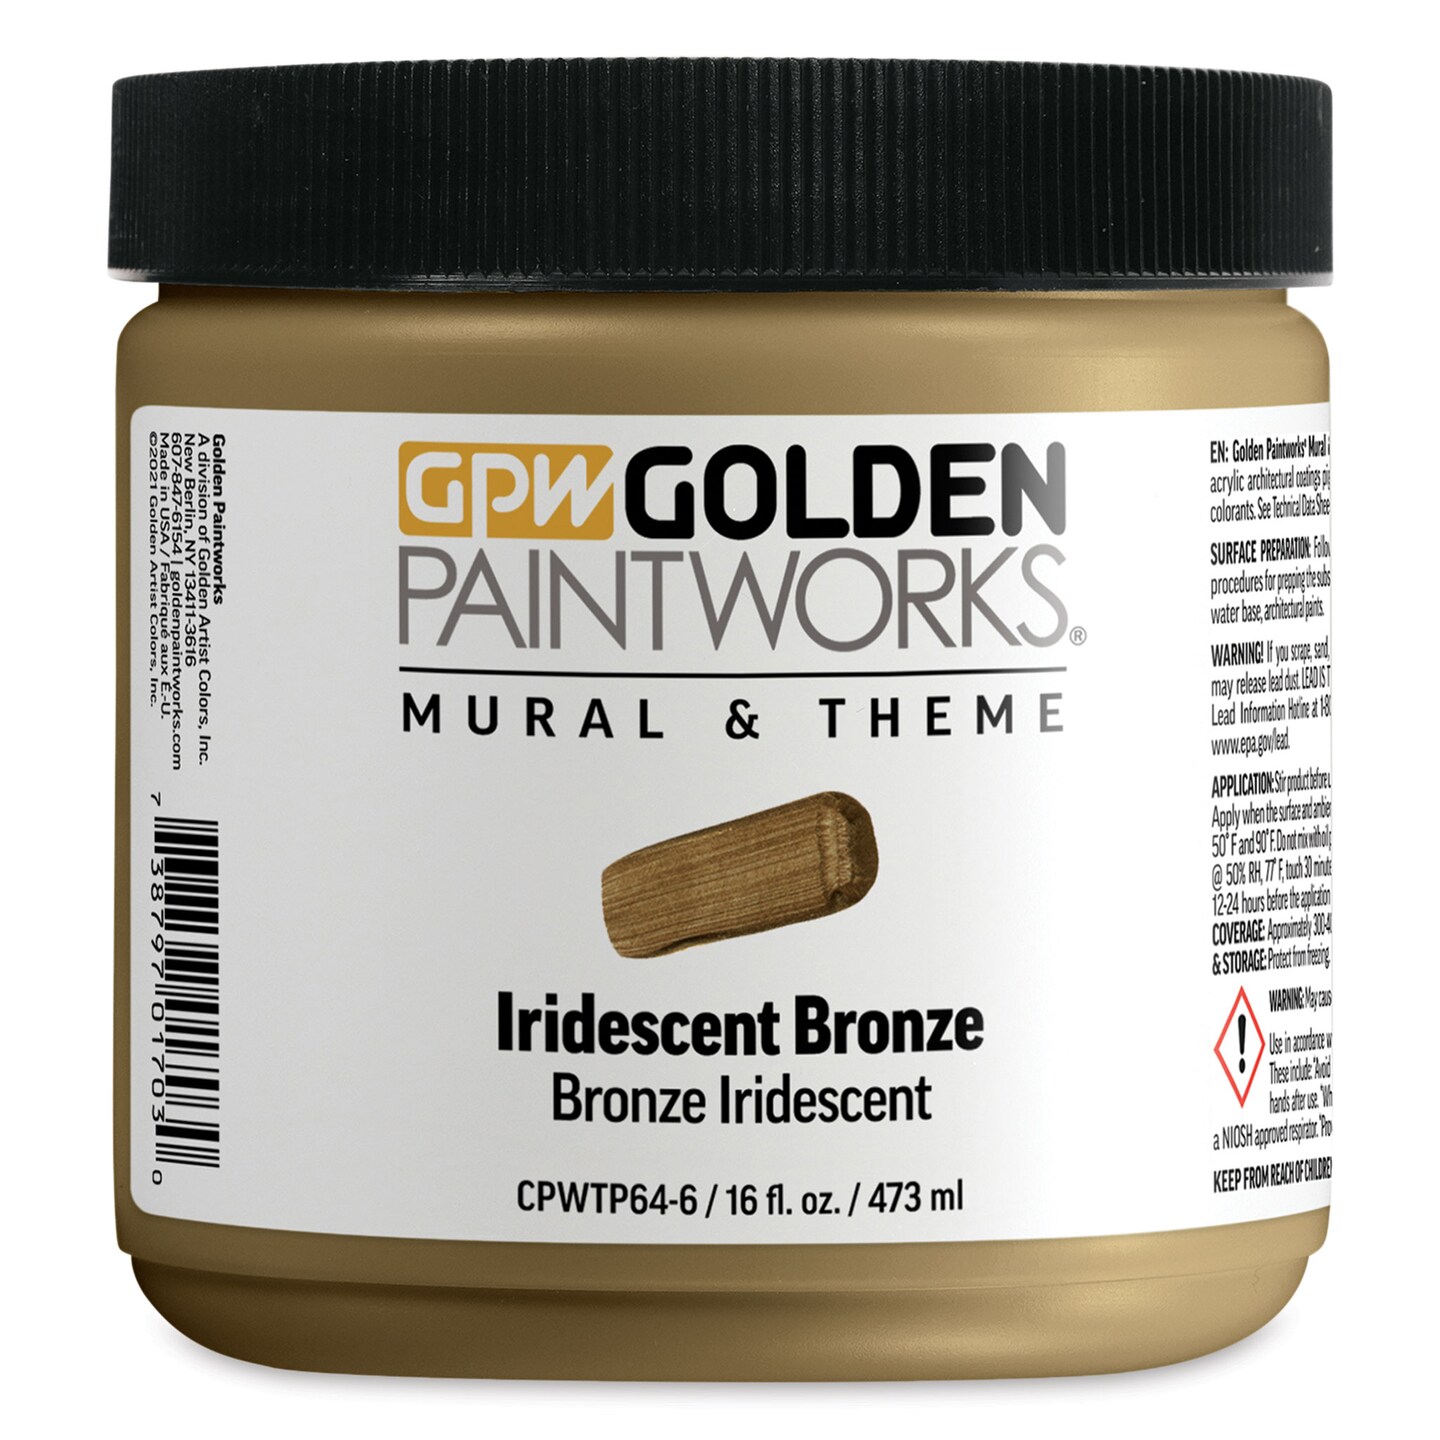 Golden Paintworks Mural and Theme Acrylic Paint - Iridescent Bronze, 16 oz, Jar